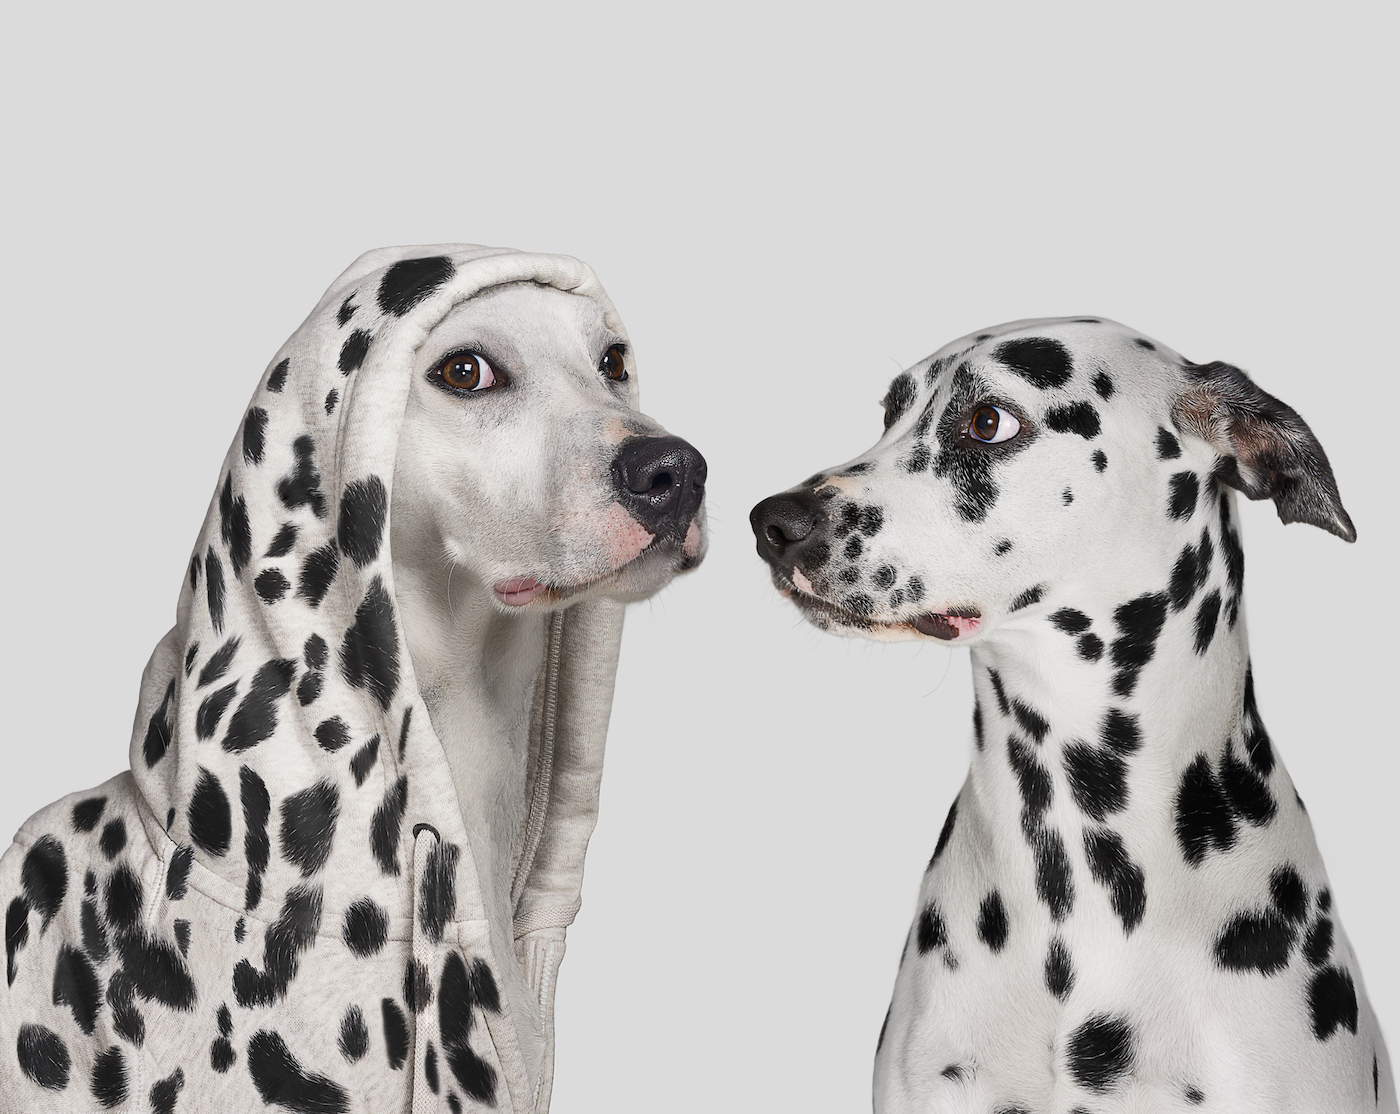 Dalmatian dog startled by white dog wearing hoodie with with spots, pretending to be a Dalmatian